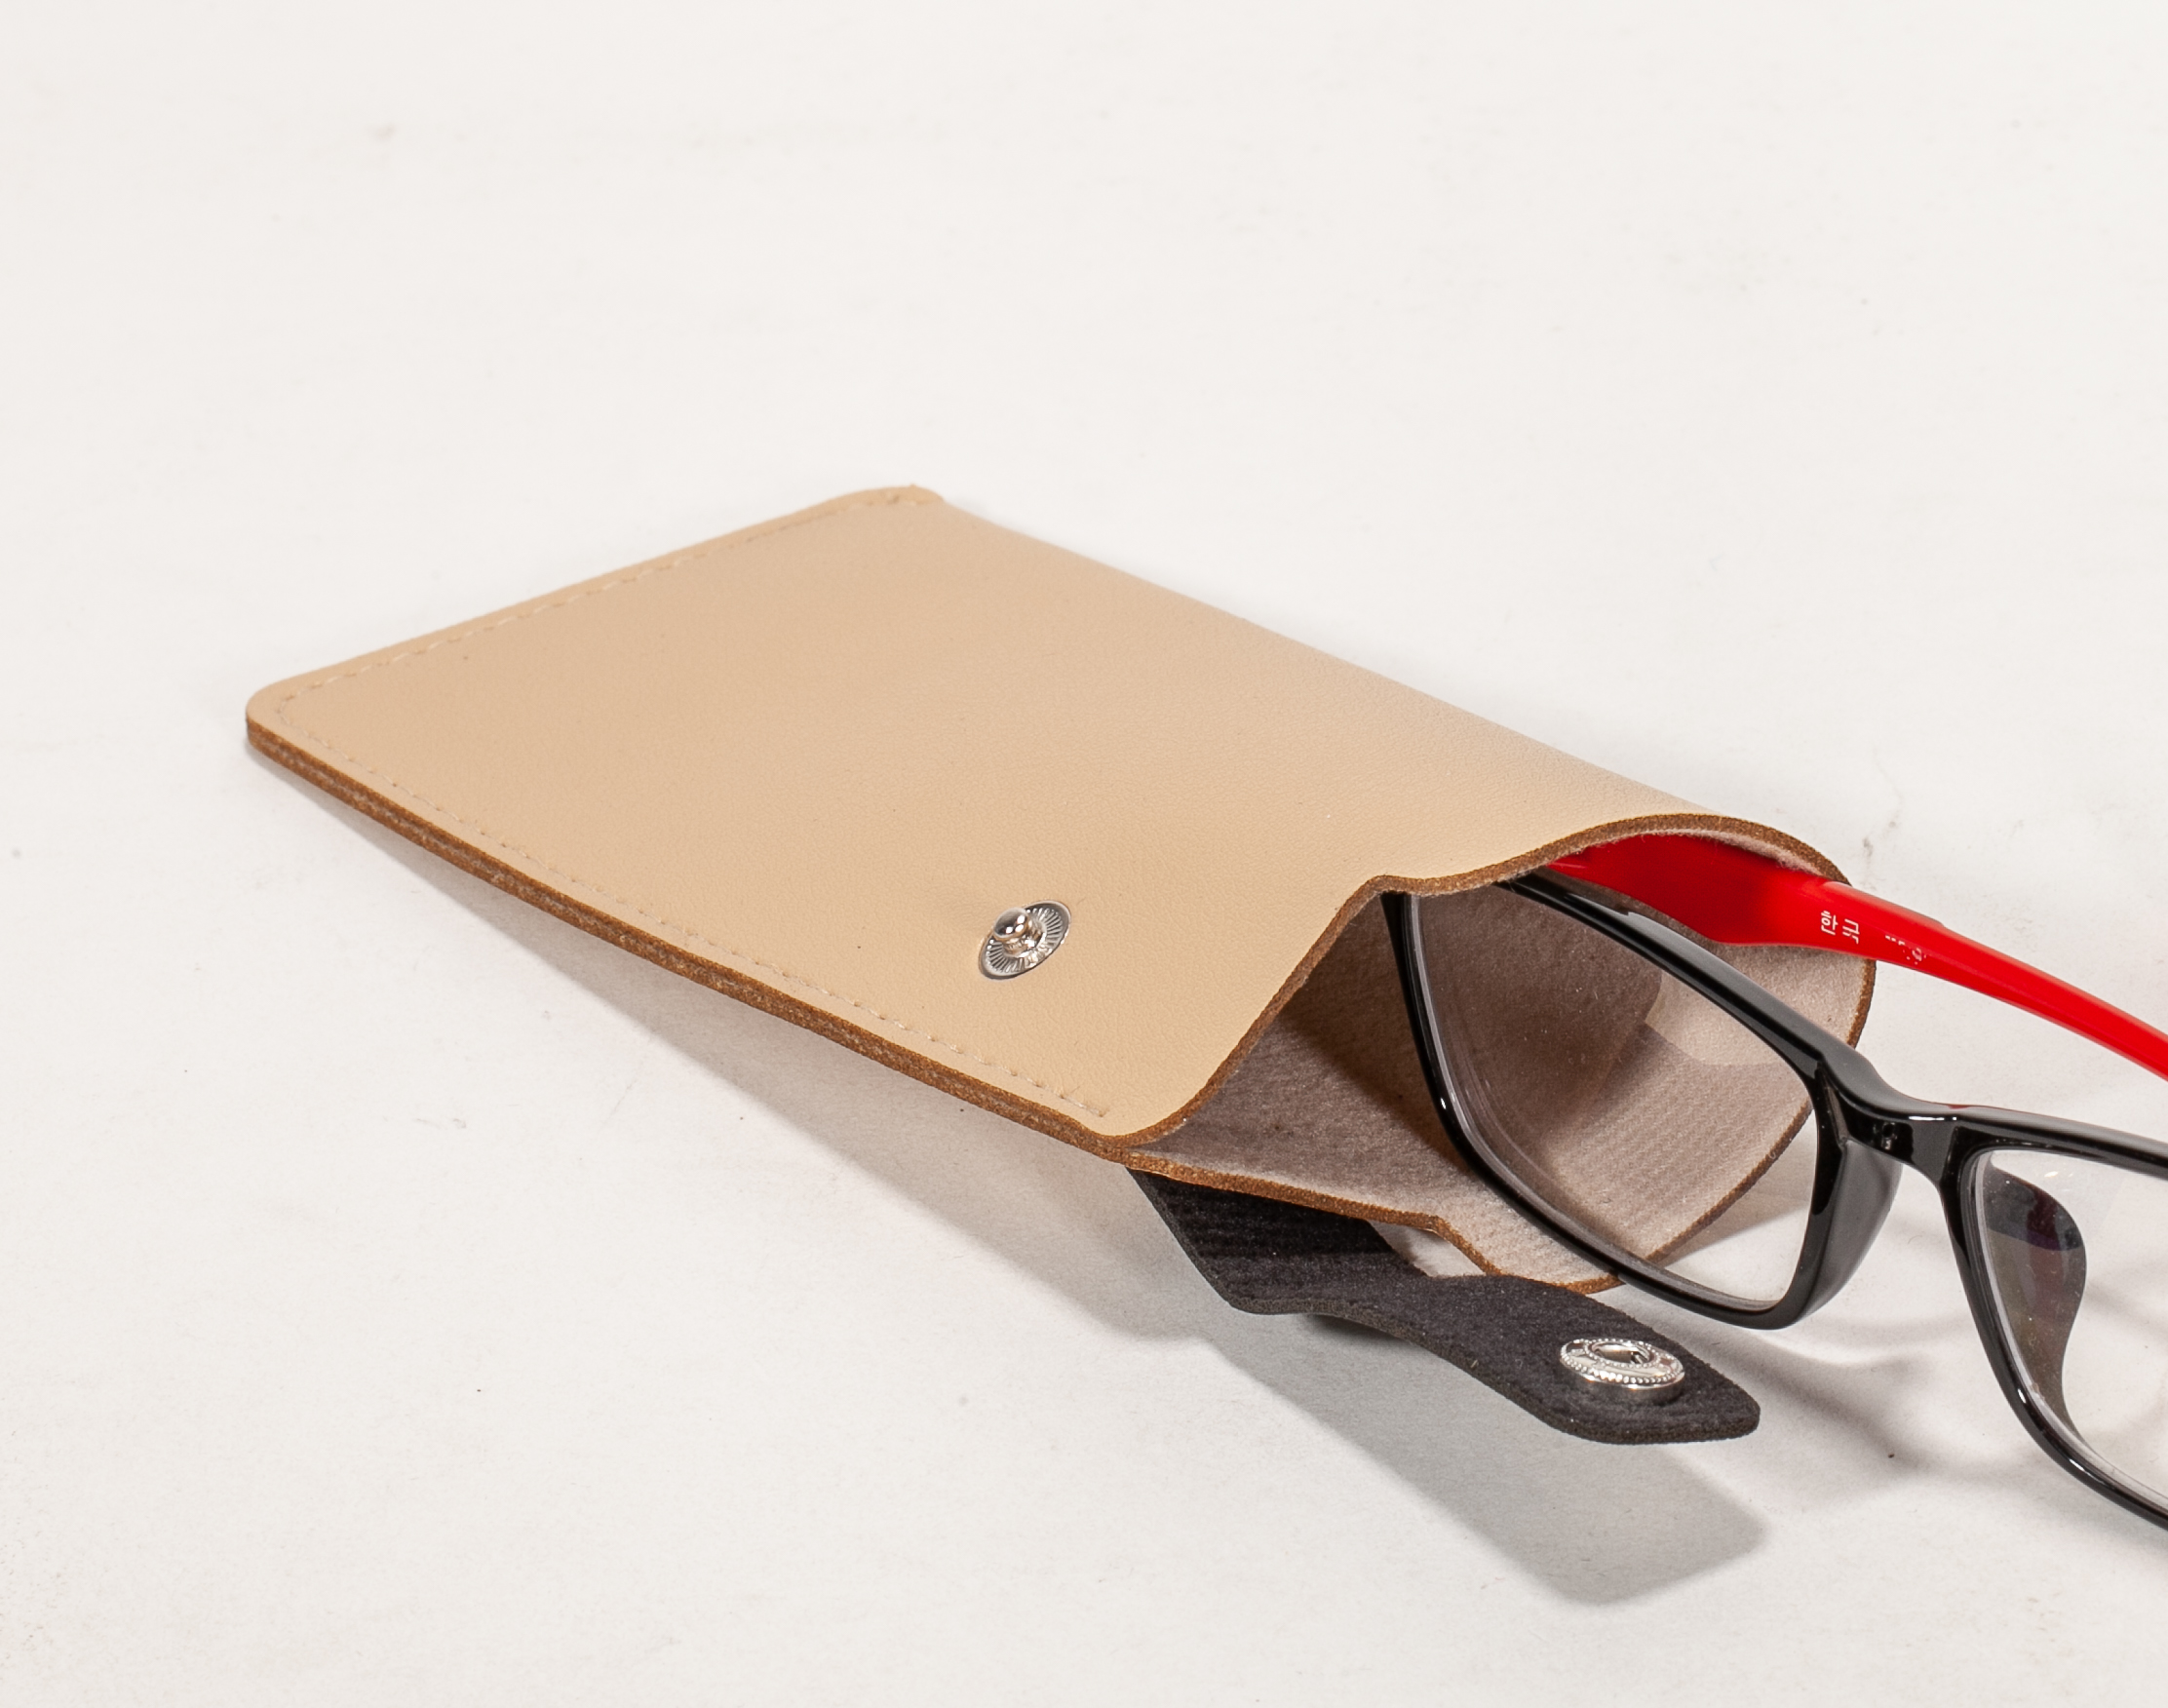 Five Color glasses pouch for 2023 Sunglasses.Soft PU material with metal bottom.Small To Carry A Light Bag for Glasses